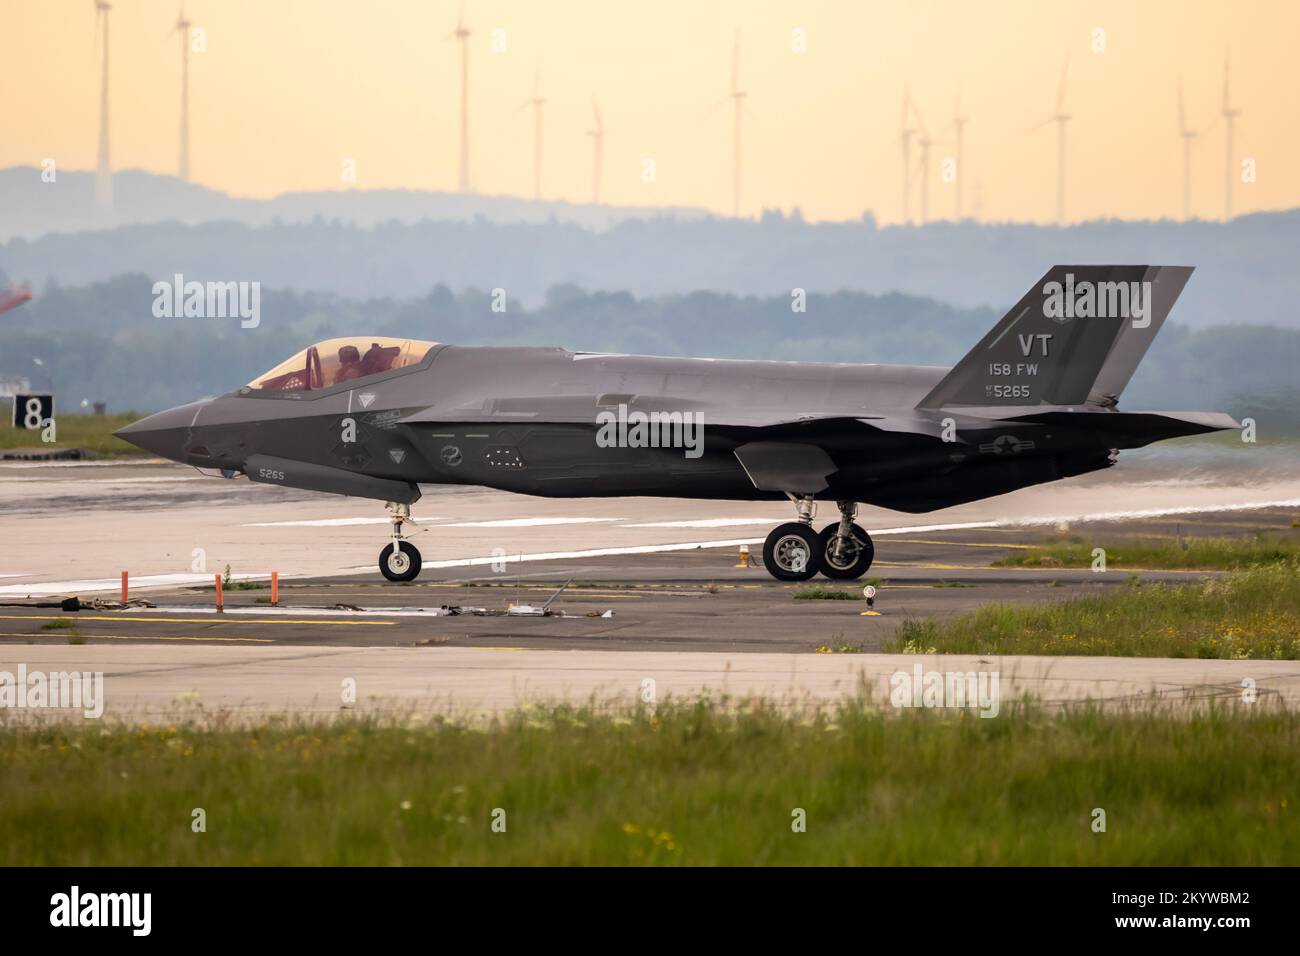 Vermont Air National Guard's 158th Fighter Wing Lockheed Martin F-35 Lightning II fighter jet. Spangdahlem, Germany - May 17, 2022 Stock Photo